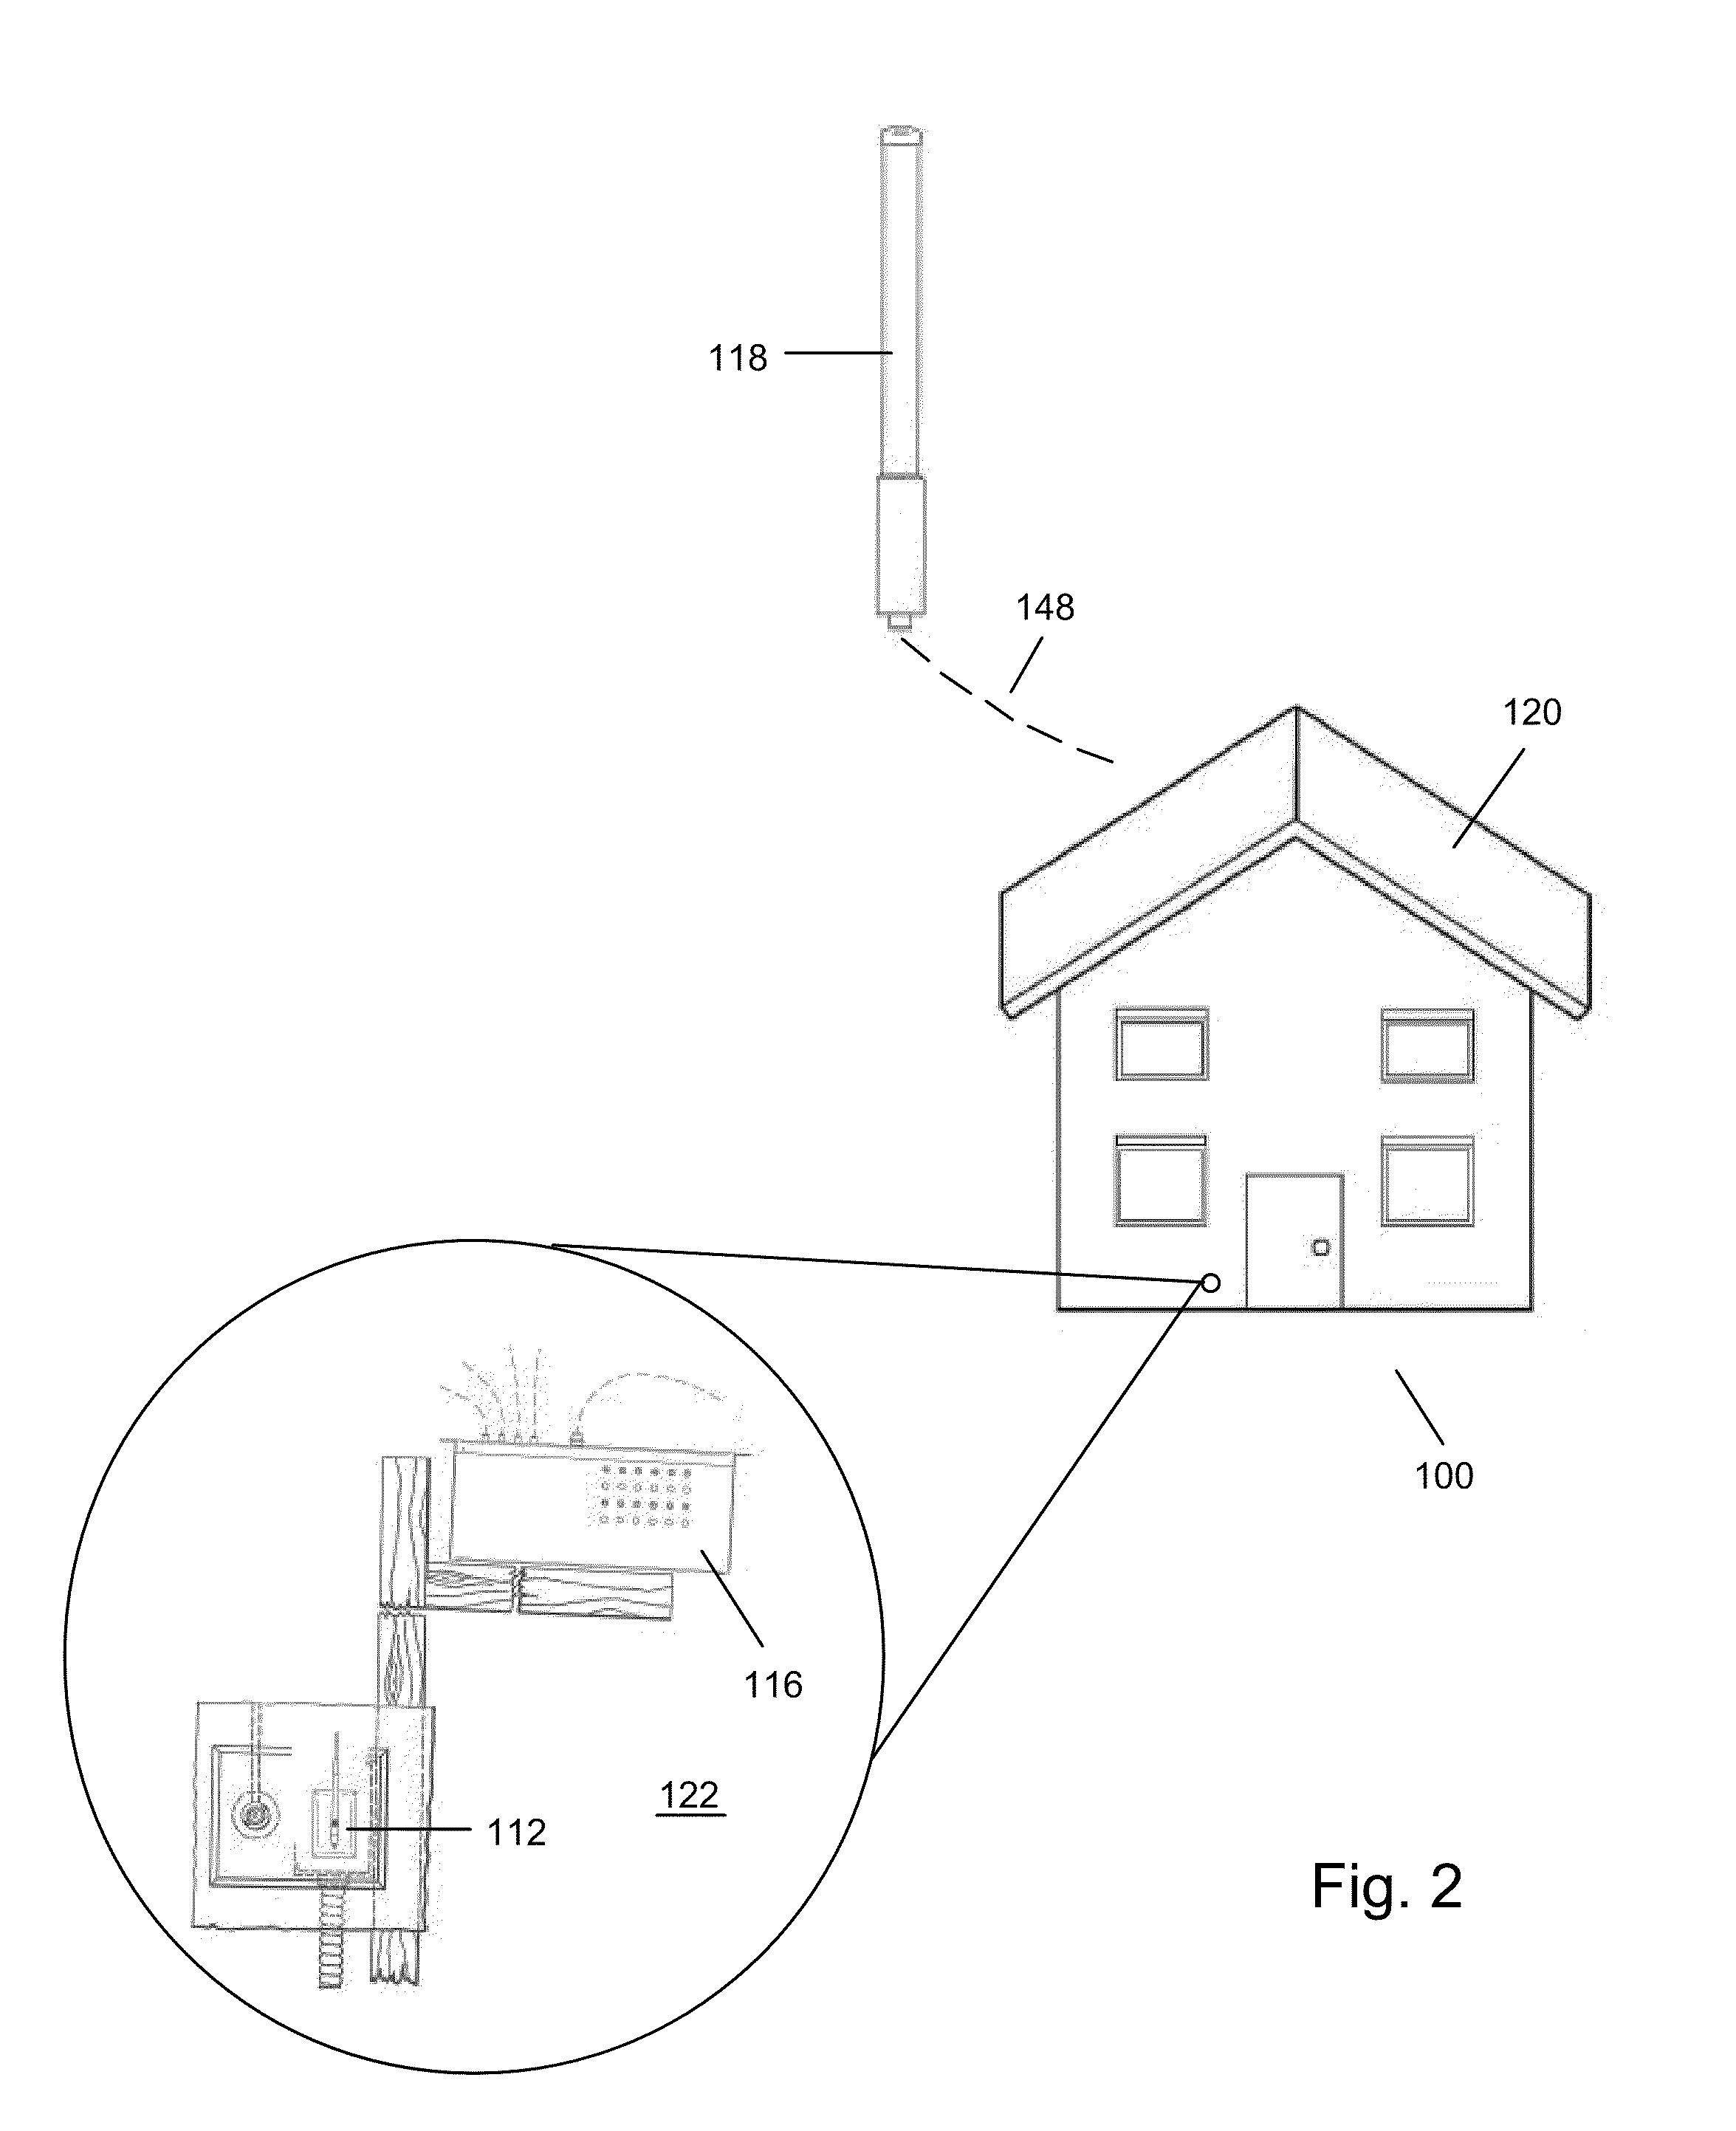 Method and Apparatus for Providing Wireless Communications Within a Building